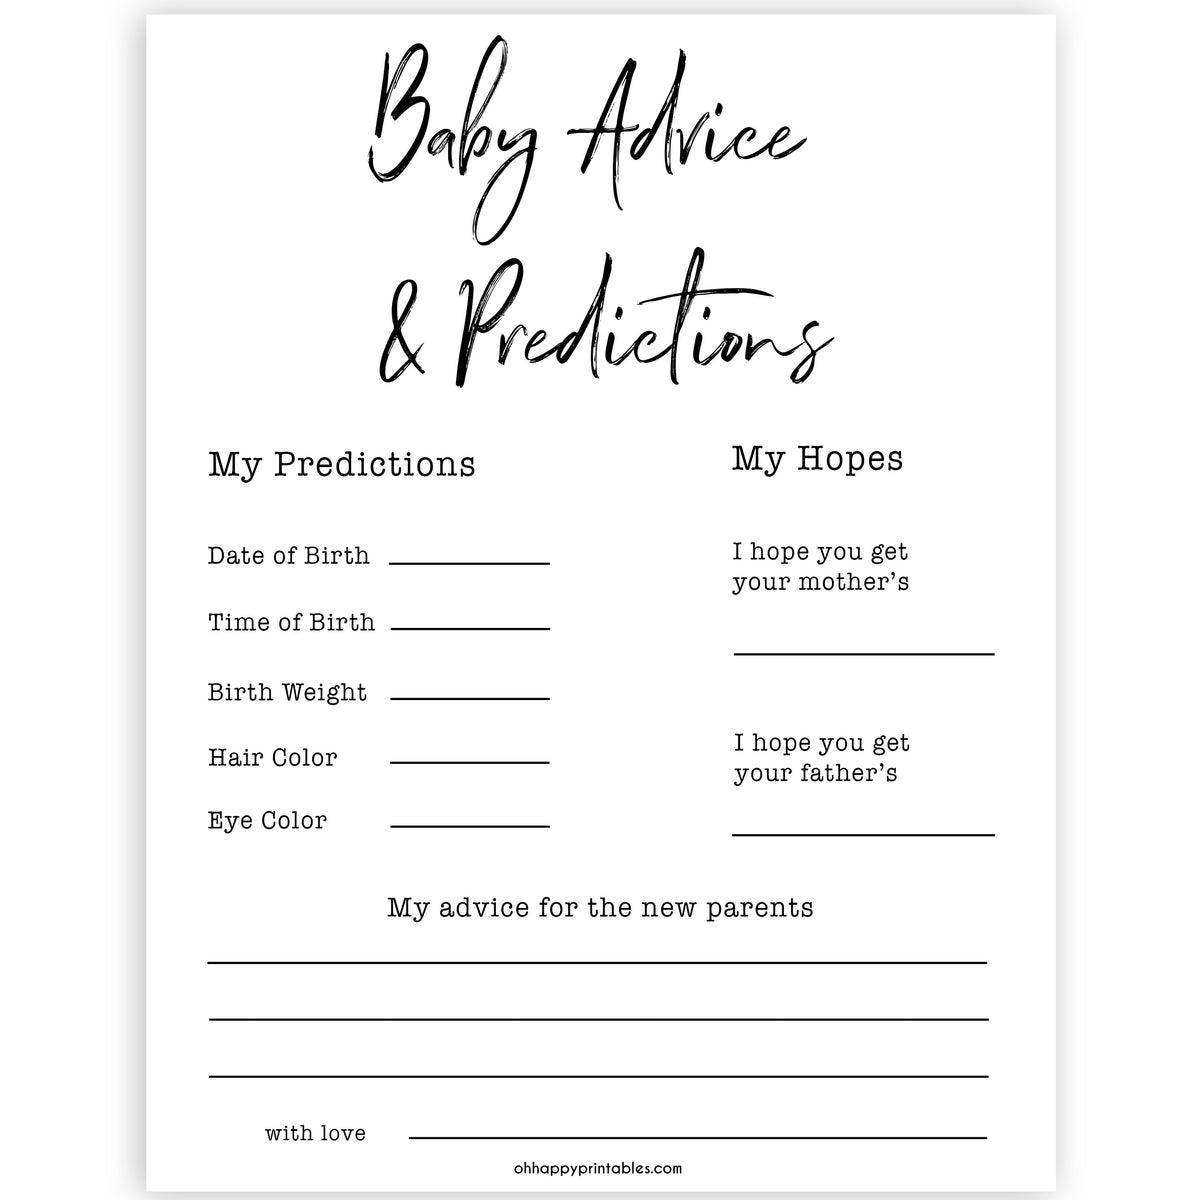 baby-advice-predictions-card-printable-gender-neutral-baby-games